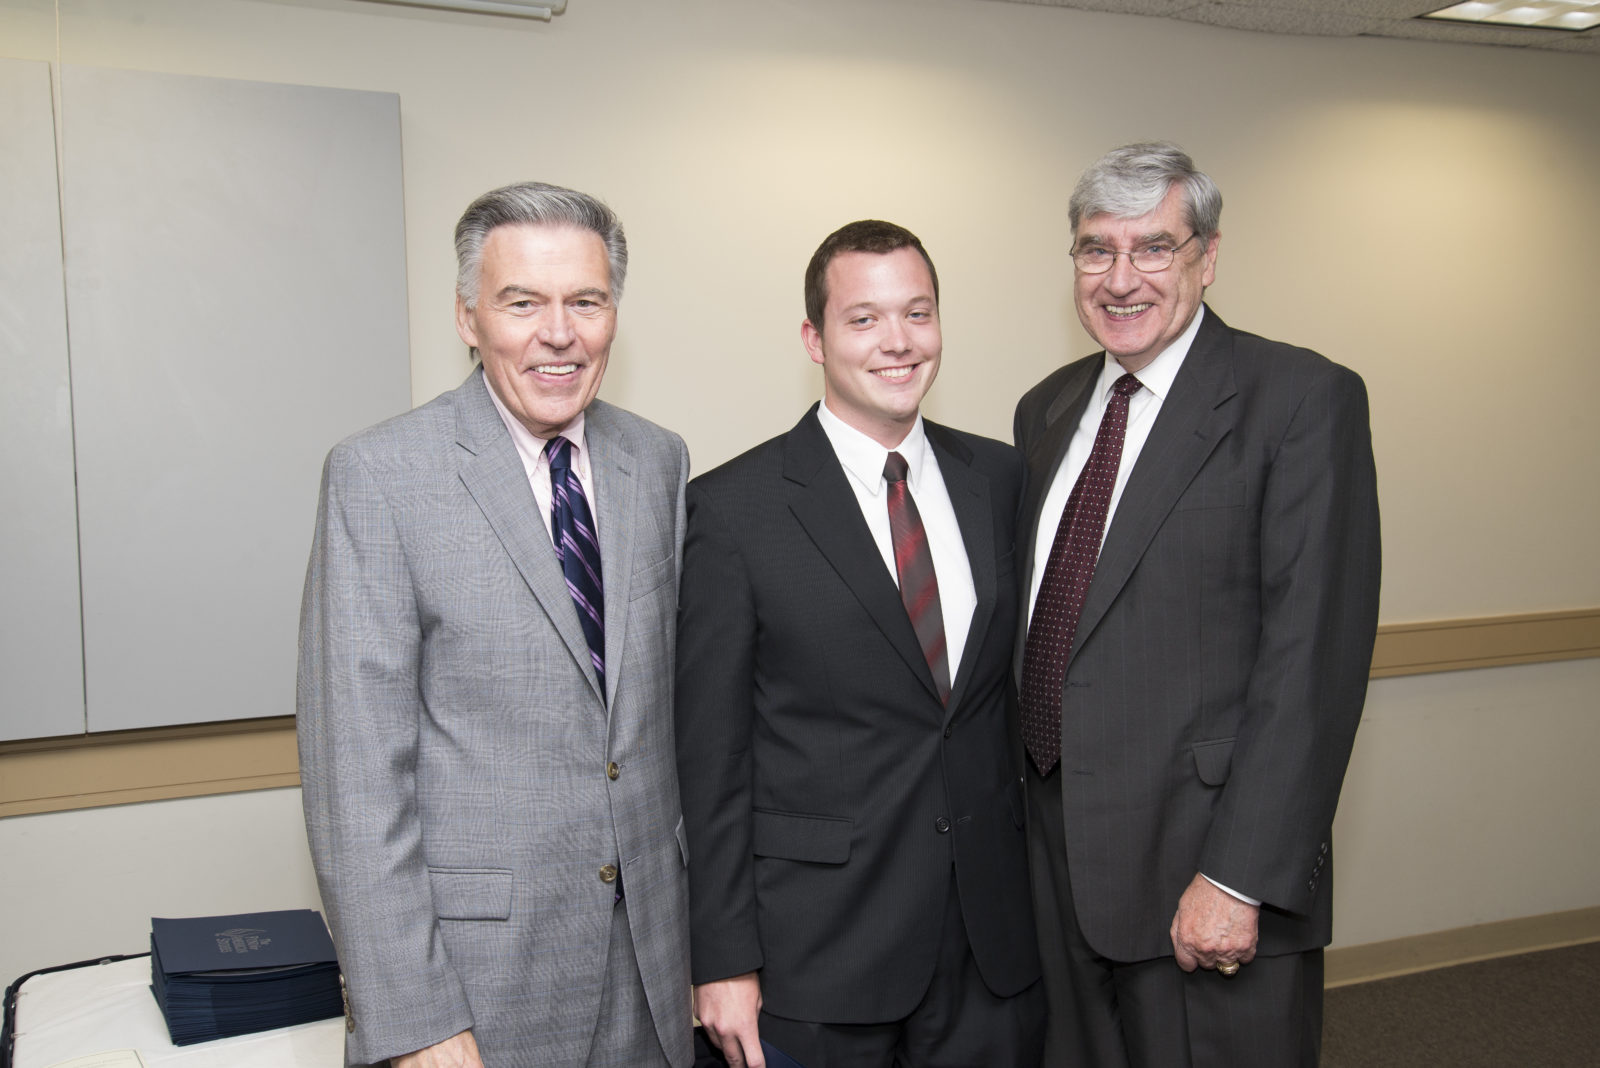 Professor Doherty (right) takes a post TFAS graduation photo in 2013 with his co-teacher Professor Collins (left) and then-student Joel Troutman (IBGA 13).